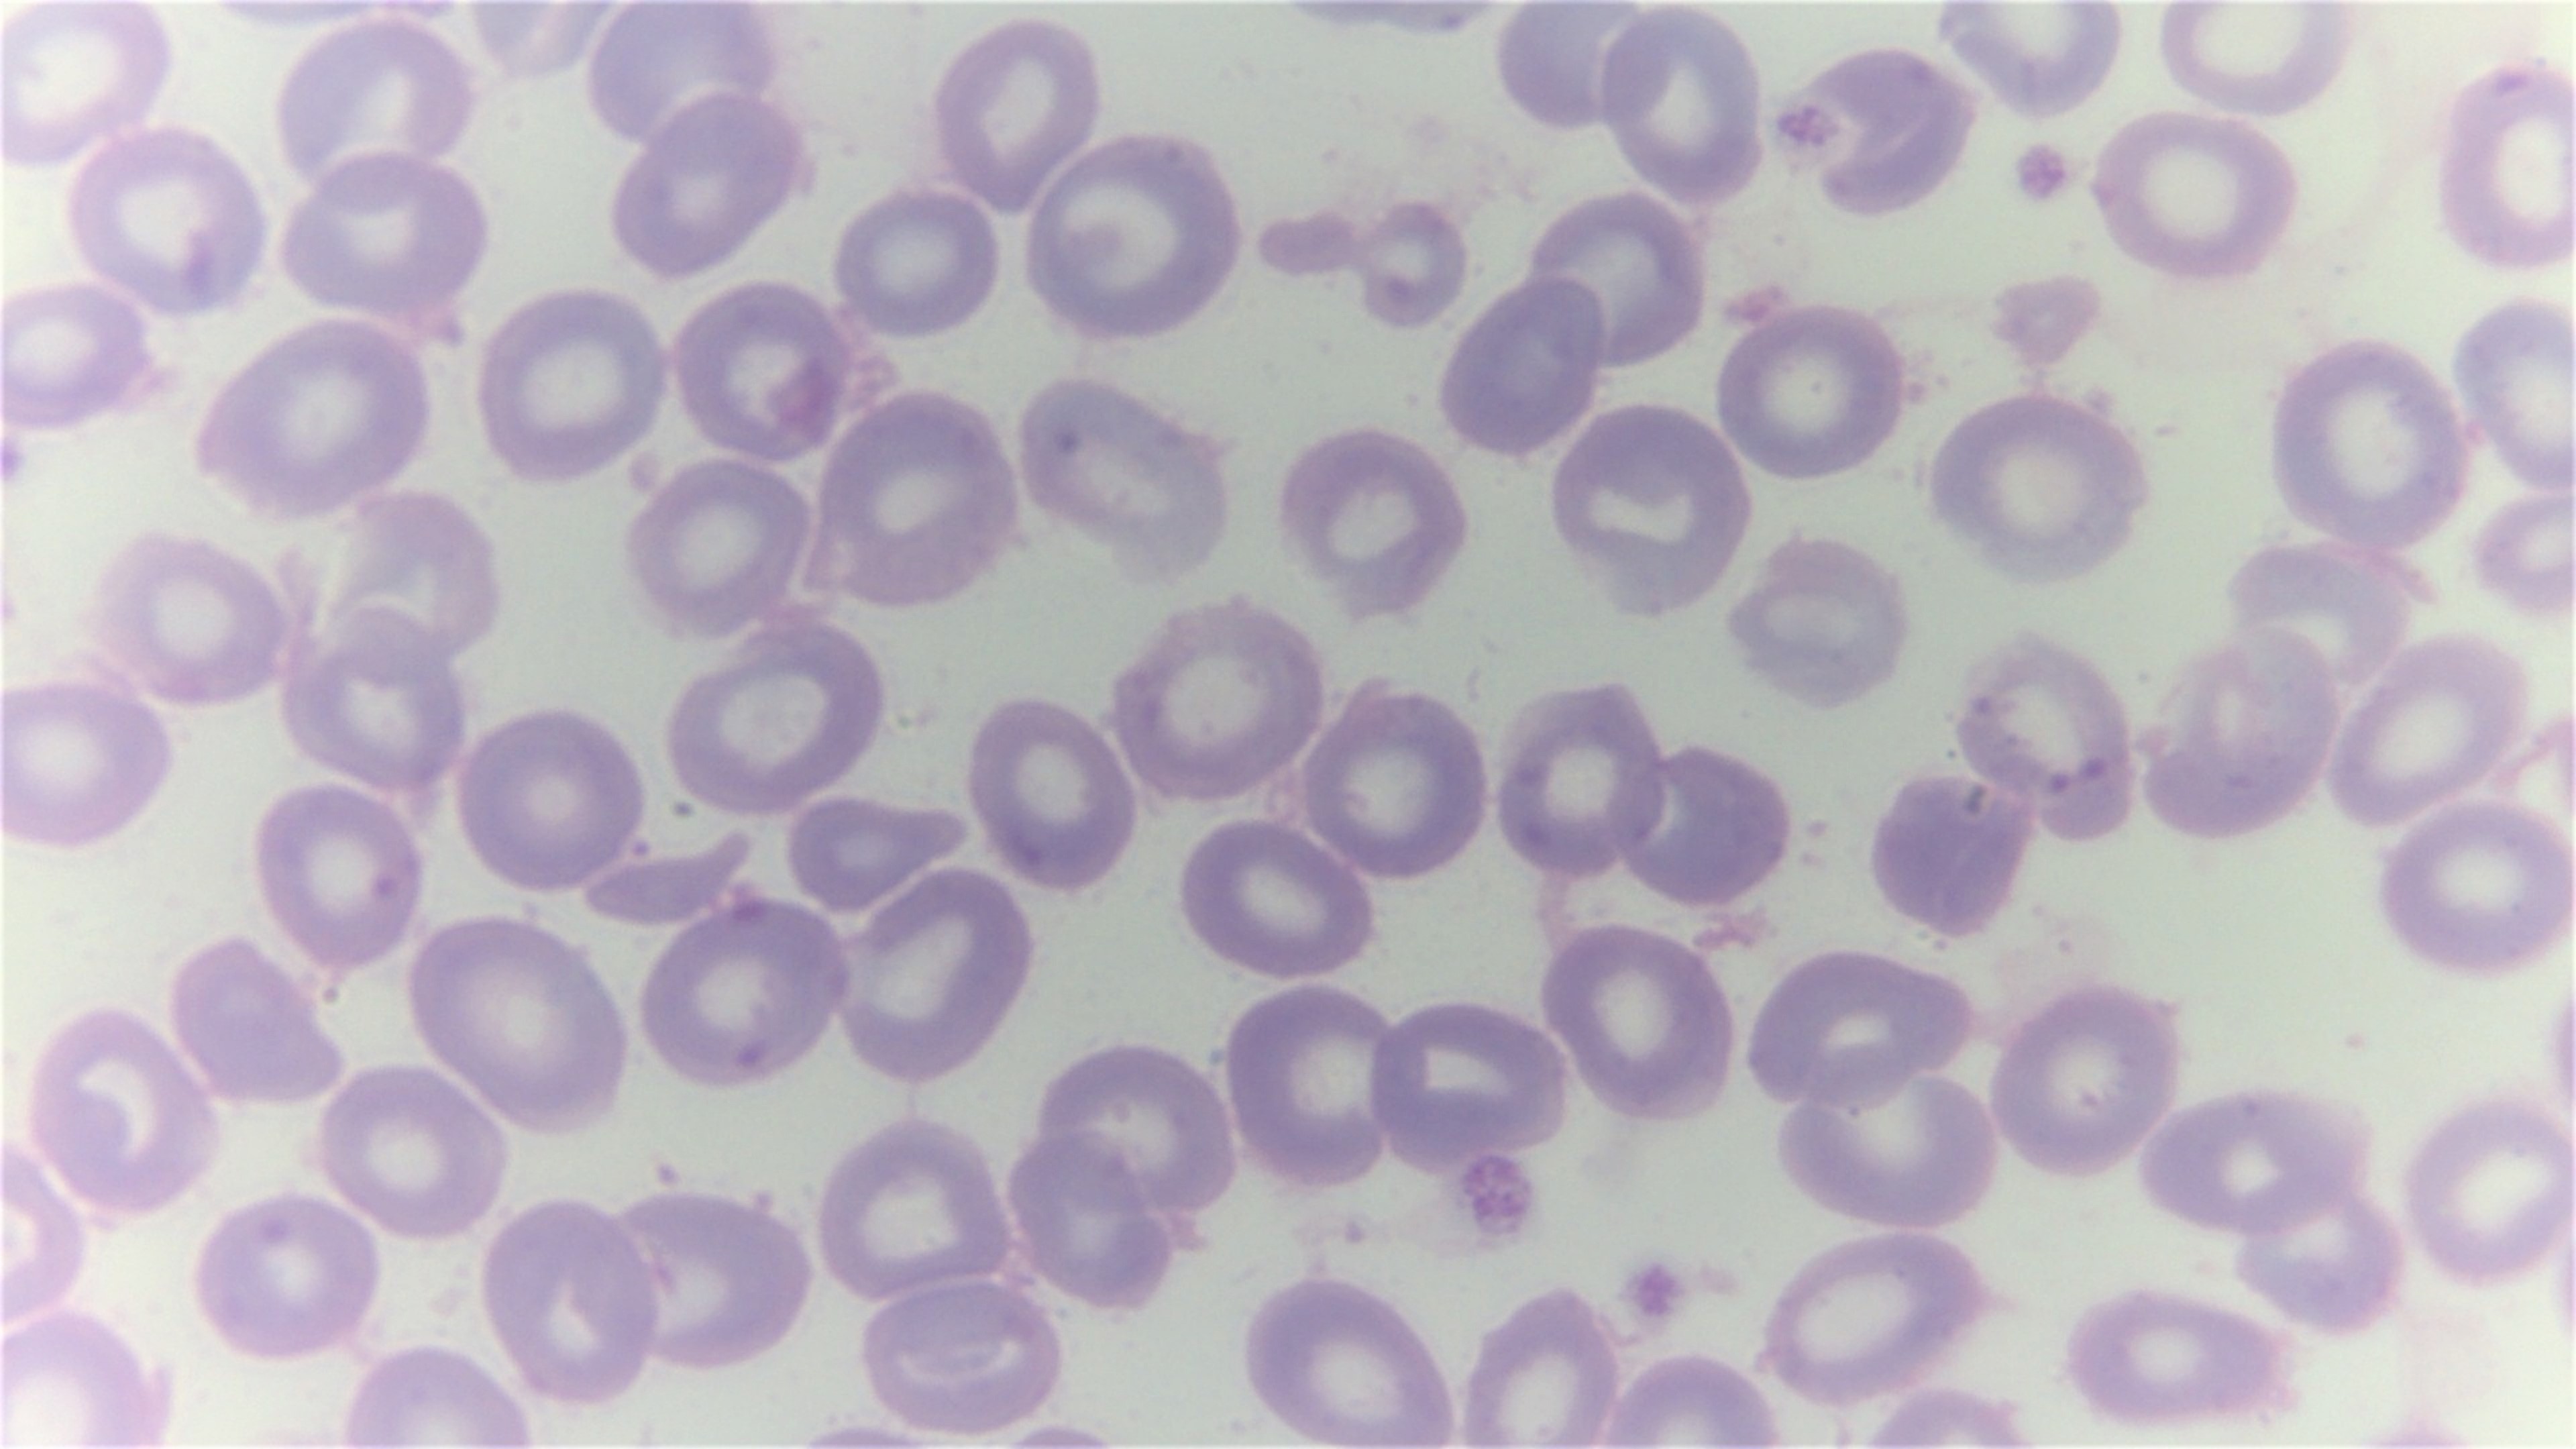 First CRISPR-Based Therapies For Sickle Cell Disease And Beta Thalassemia Approved In The UK